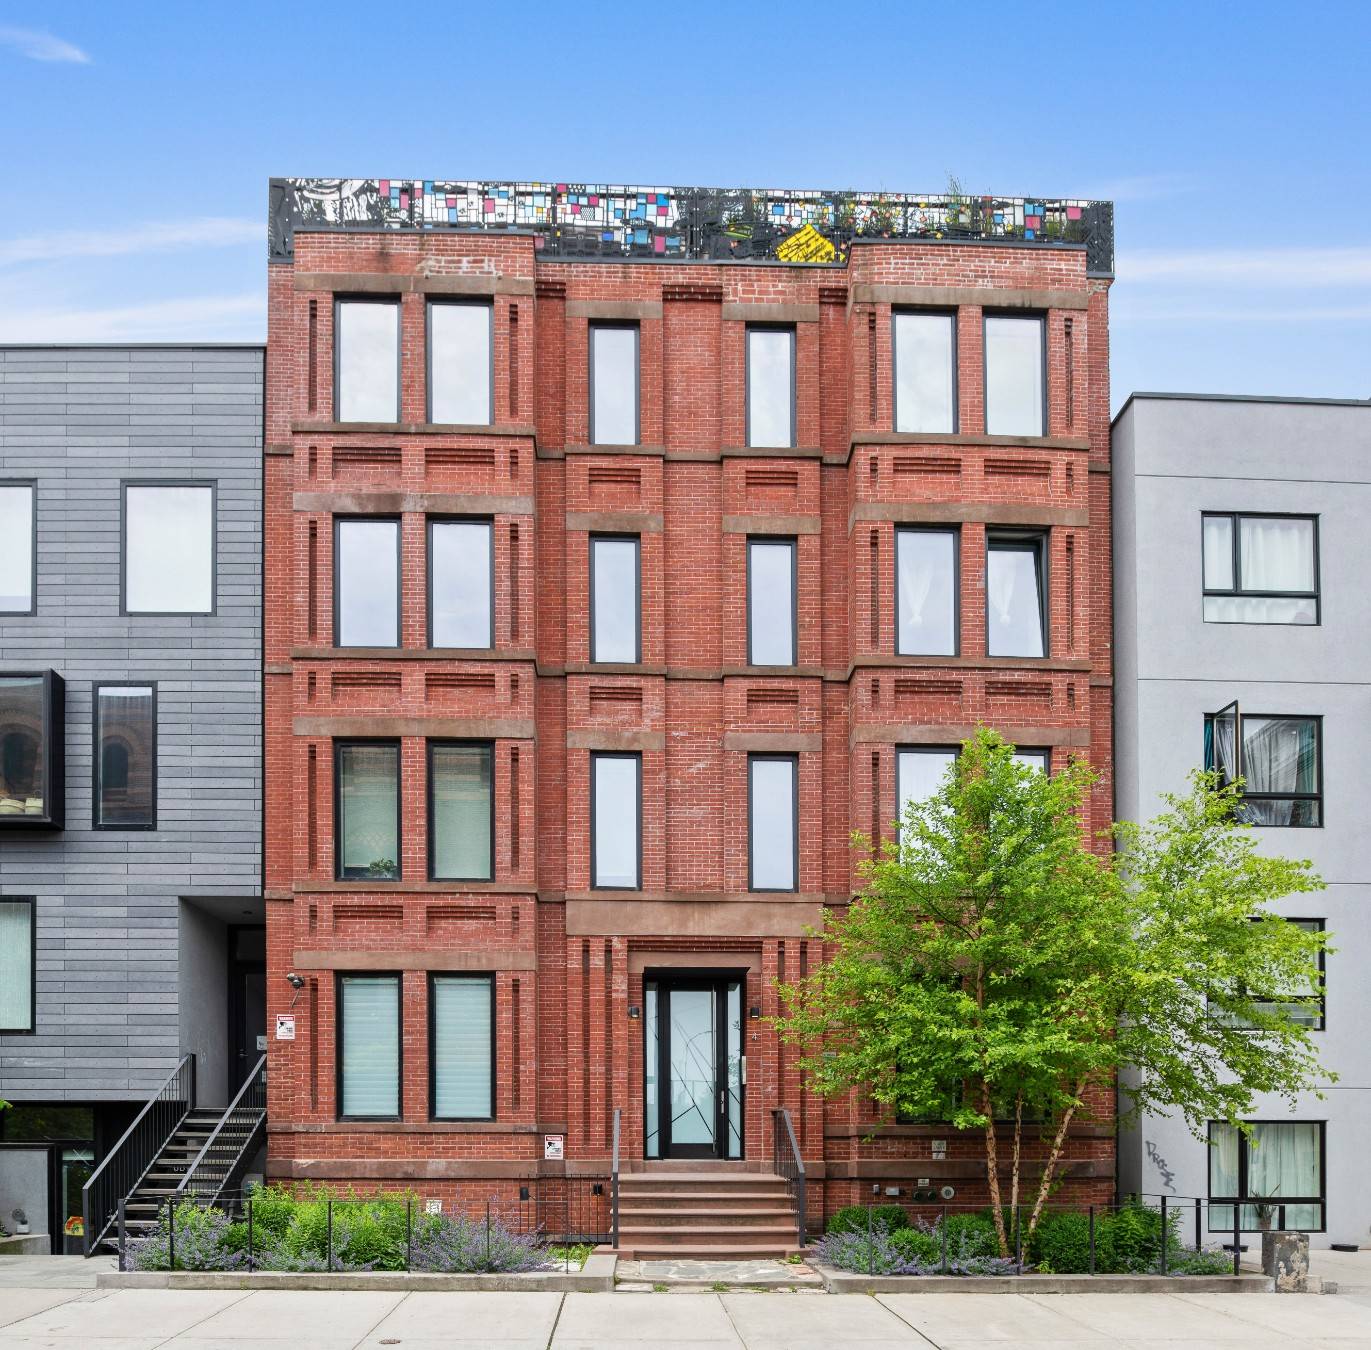 Rental Prepare yourself to be amazed by your new home in the heart of Clinton Hill.